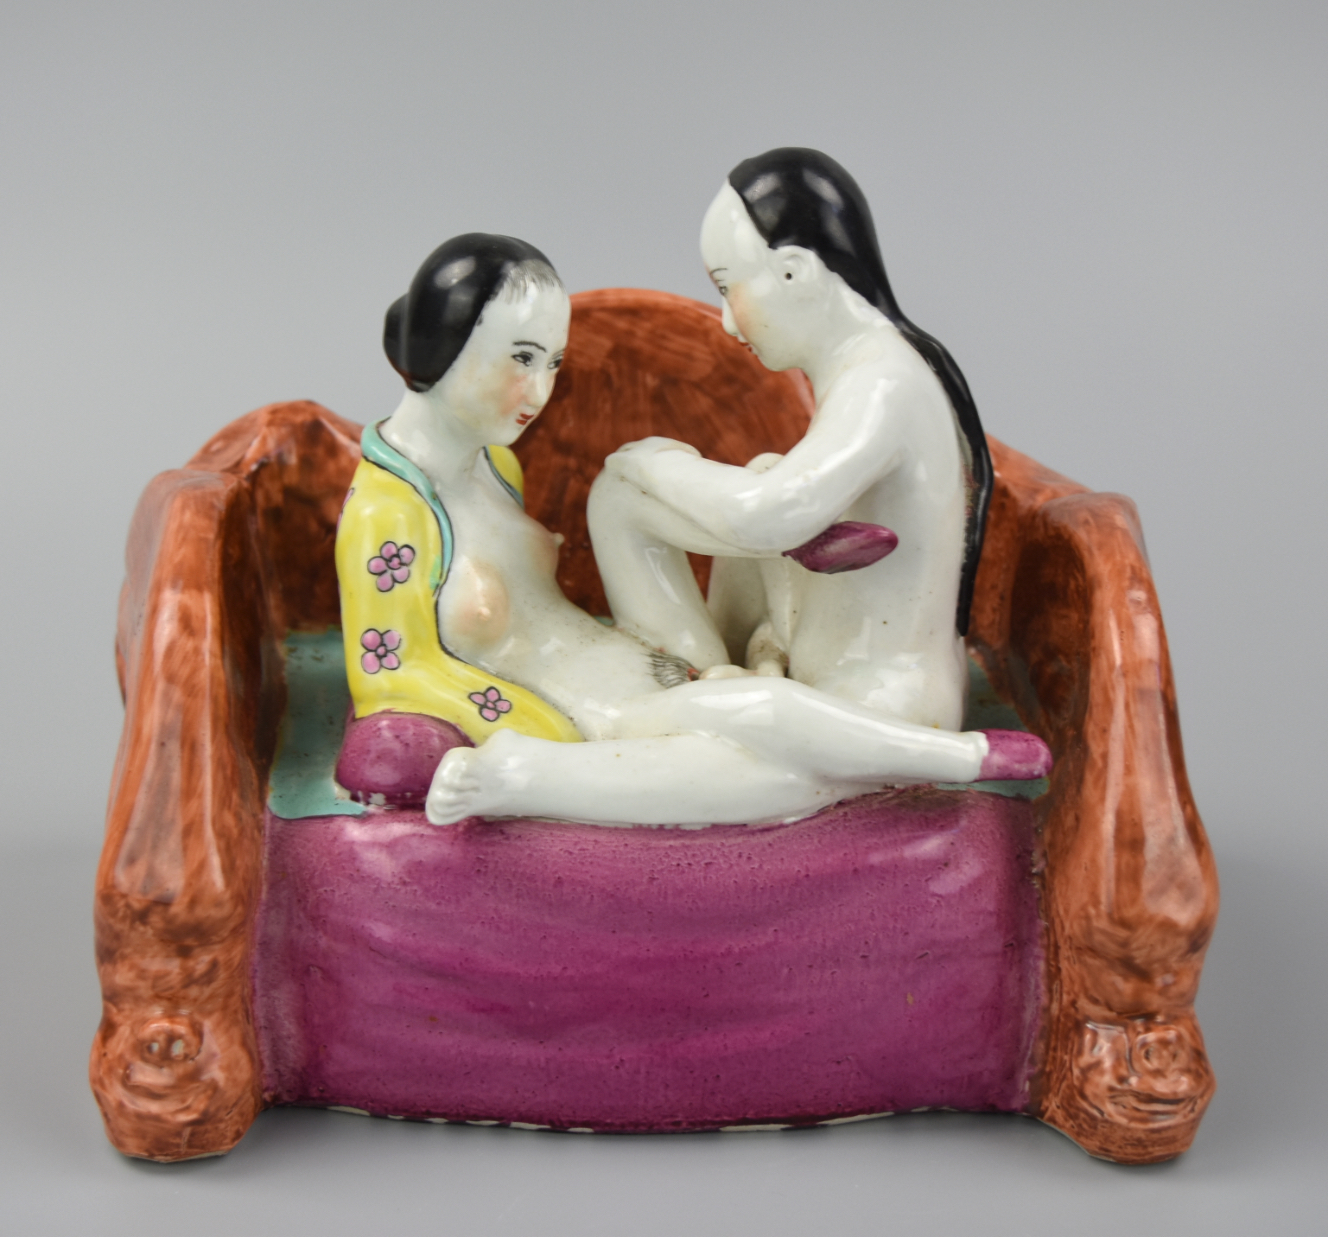 EROTIC CHINESE FAMILLE ROSE FIGURES 2cf4e5